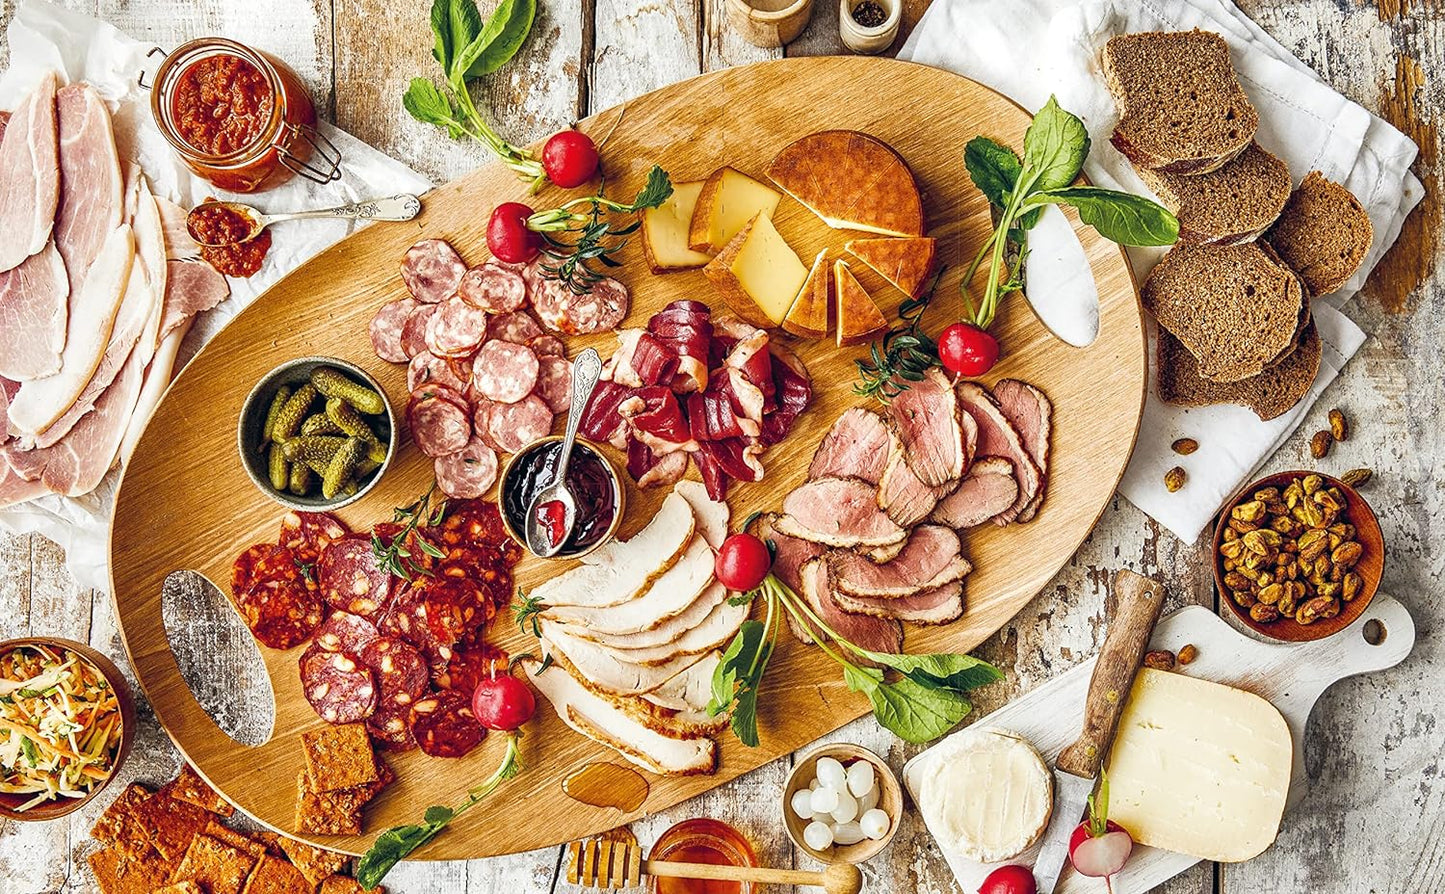 Charcuterie Boards: Platters, boards, plates and simple recipes to share